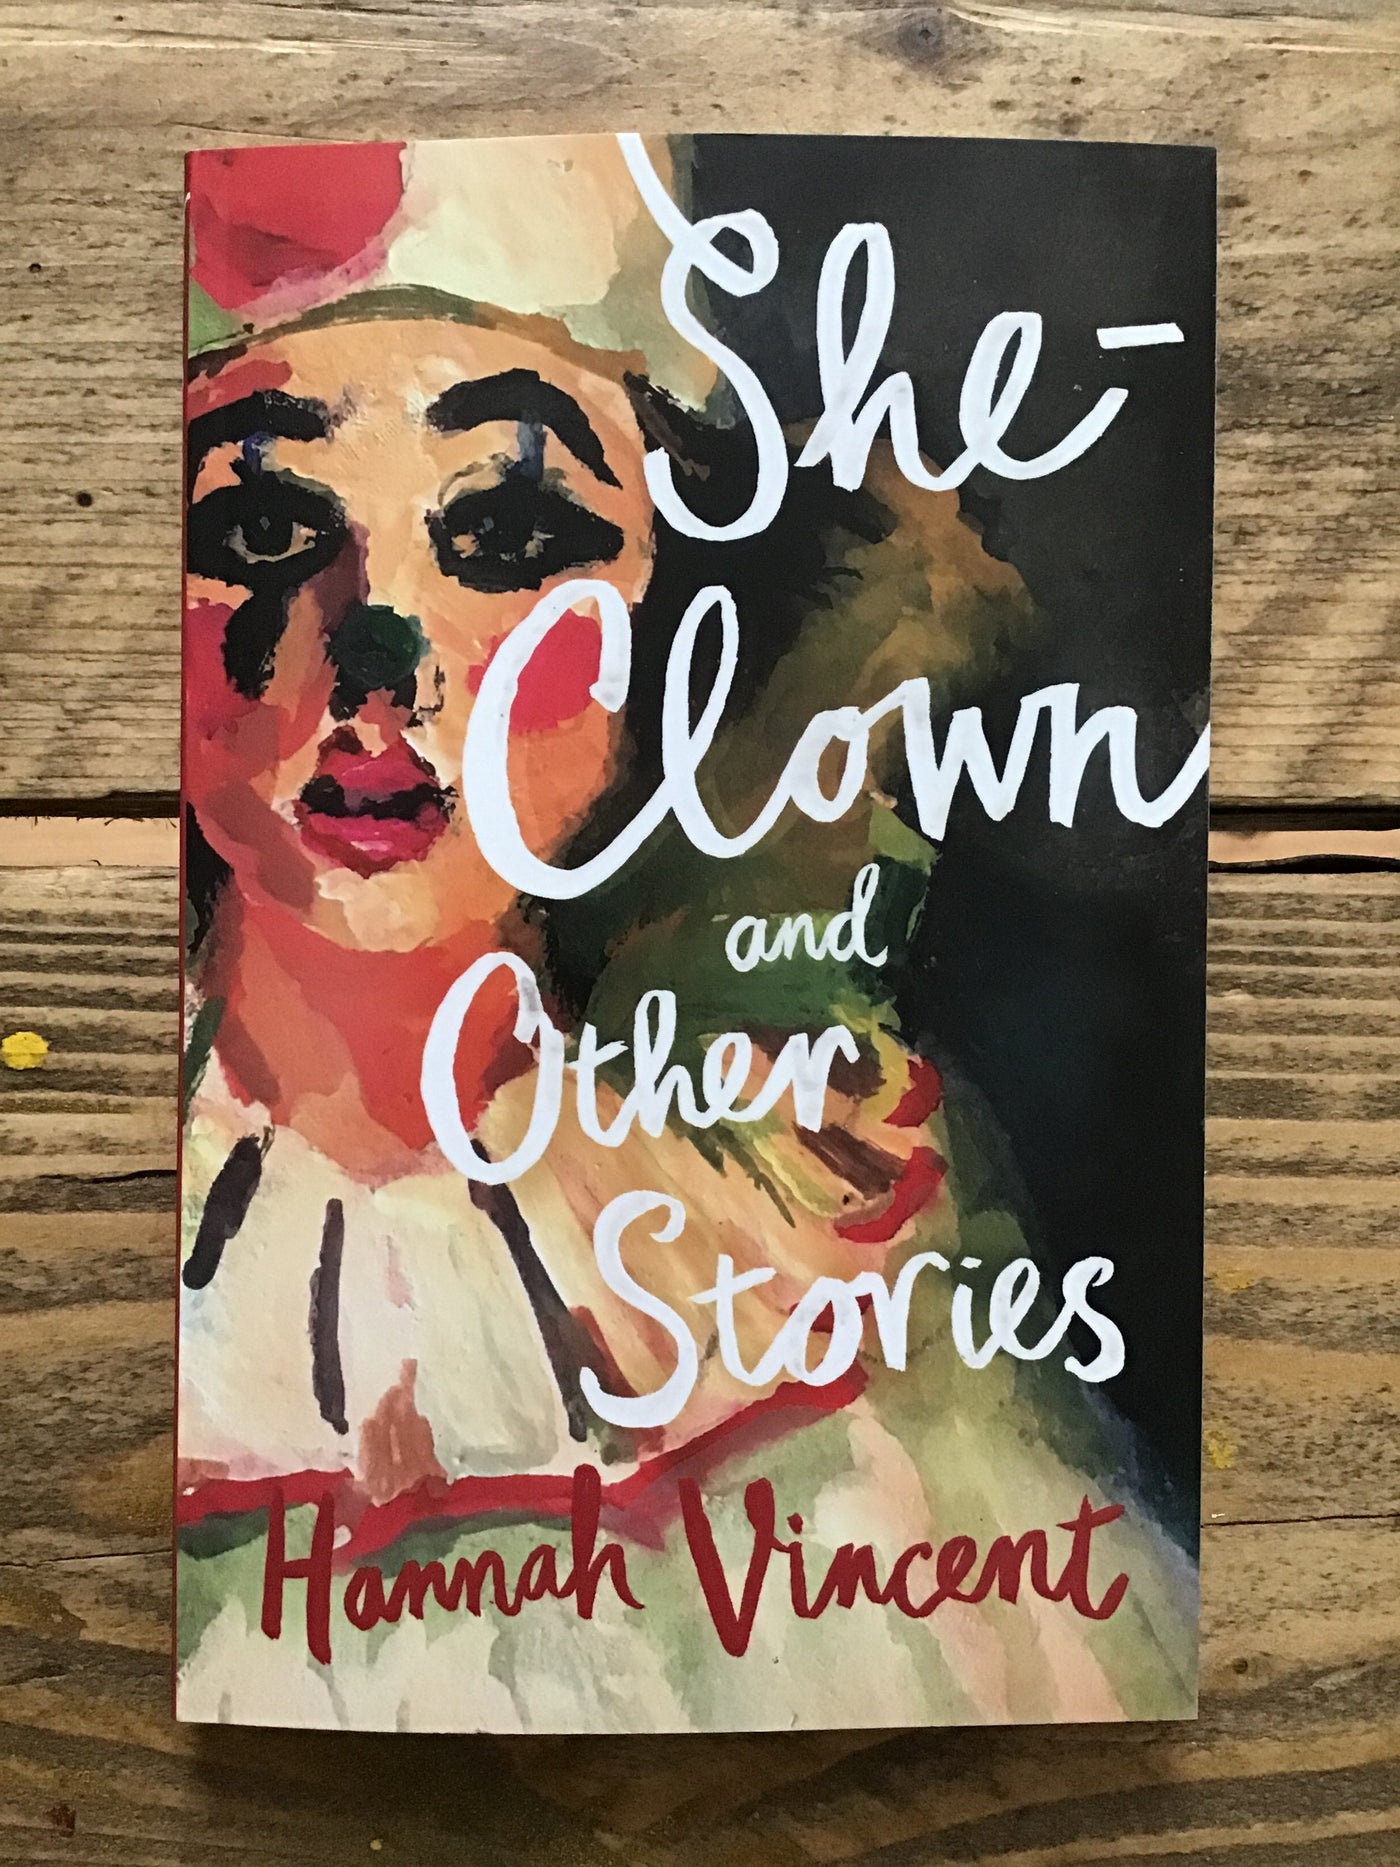 She Clown & Other Stories